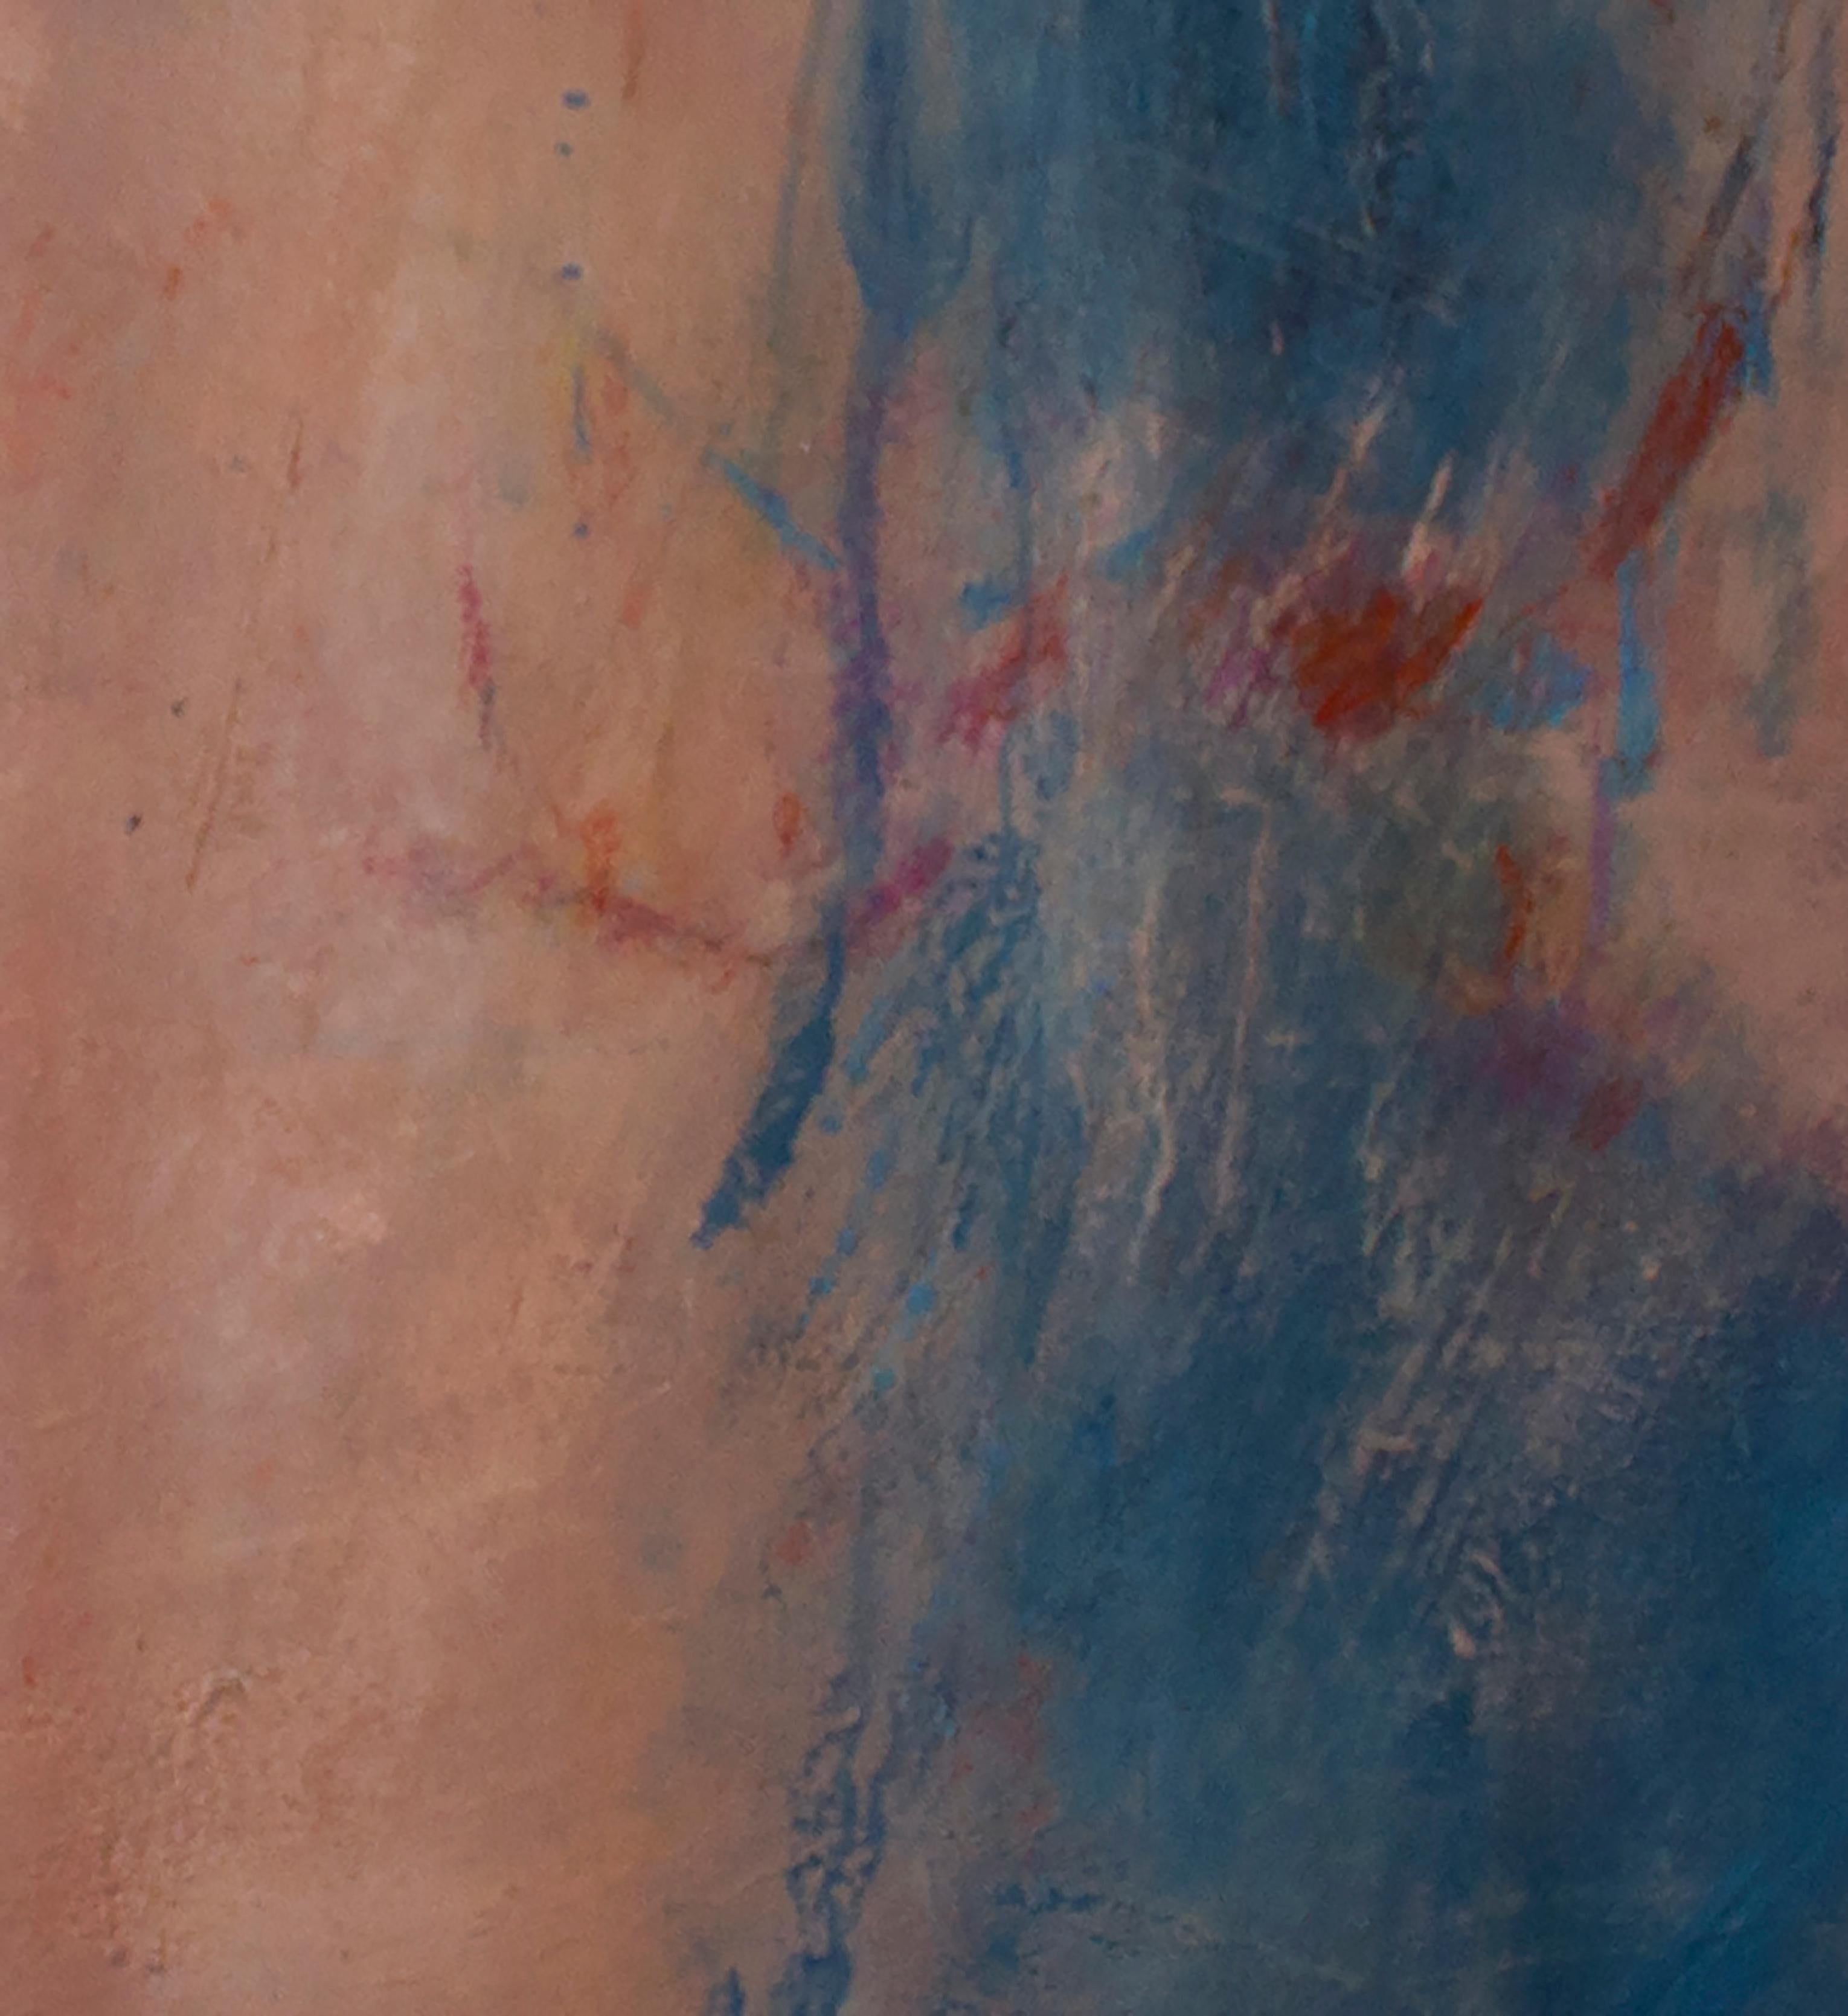 Between Heaven and Earth: Untitled #3 acrylic, graphite, oil pastels on canvas - Painting by Stephanie Visser 